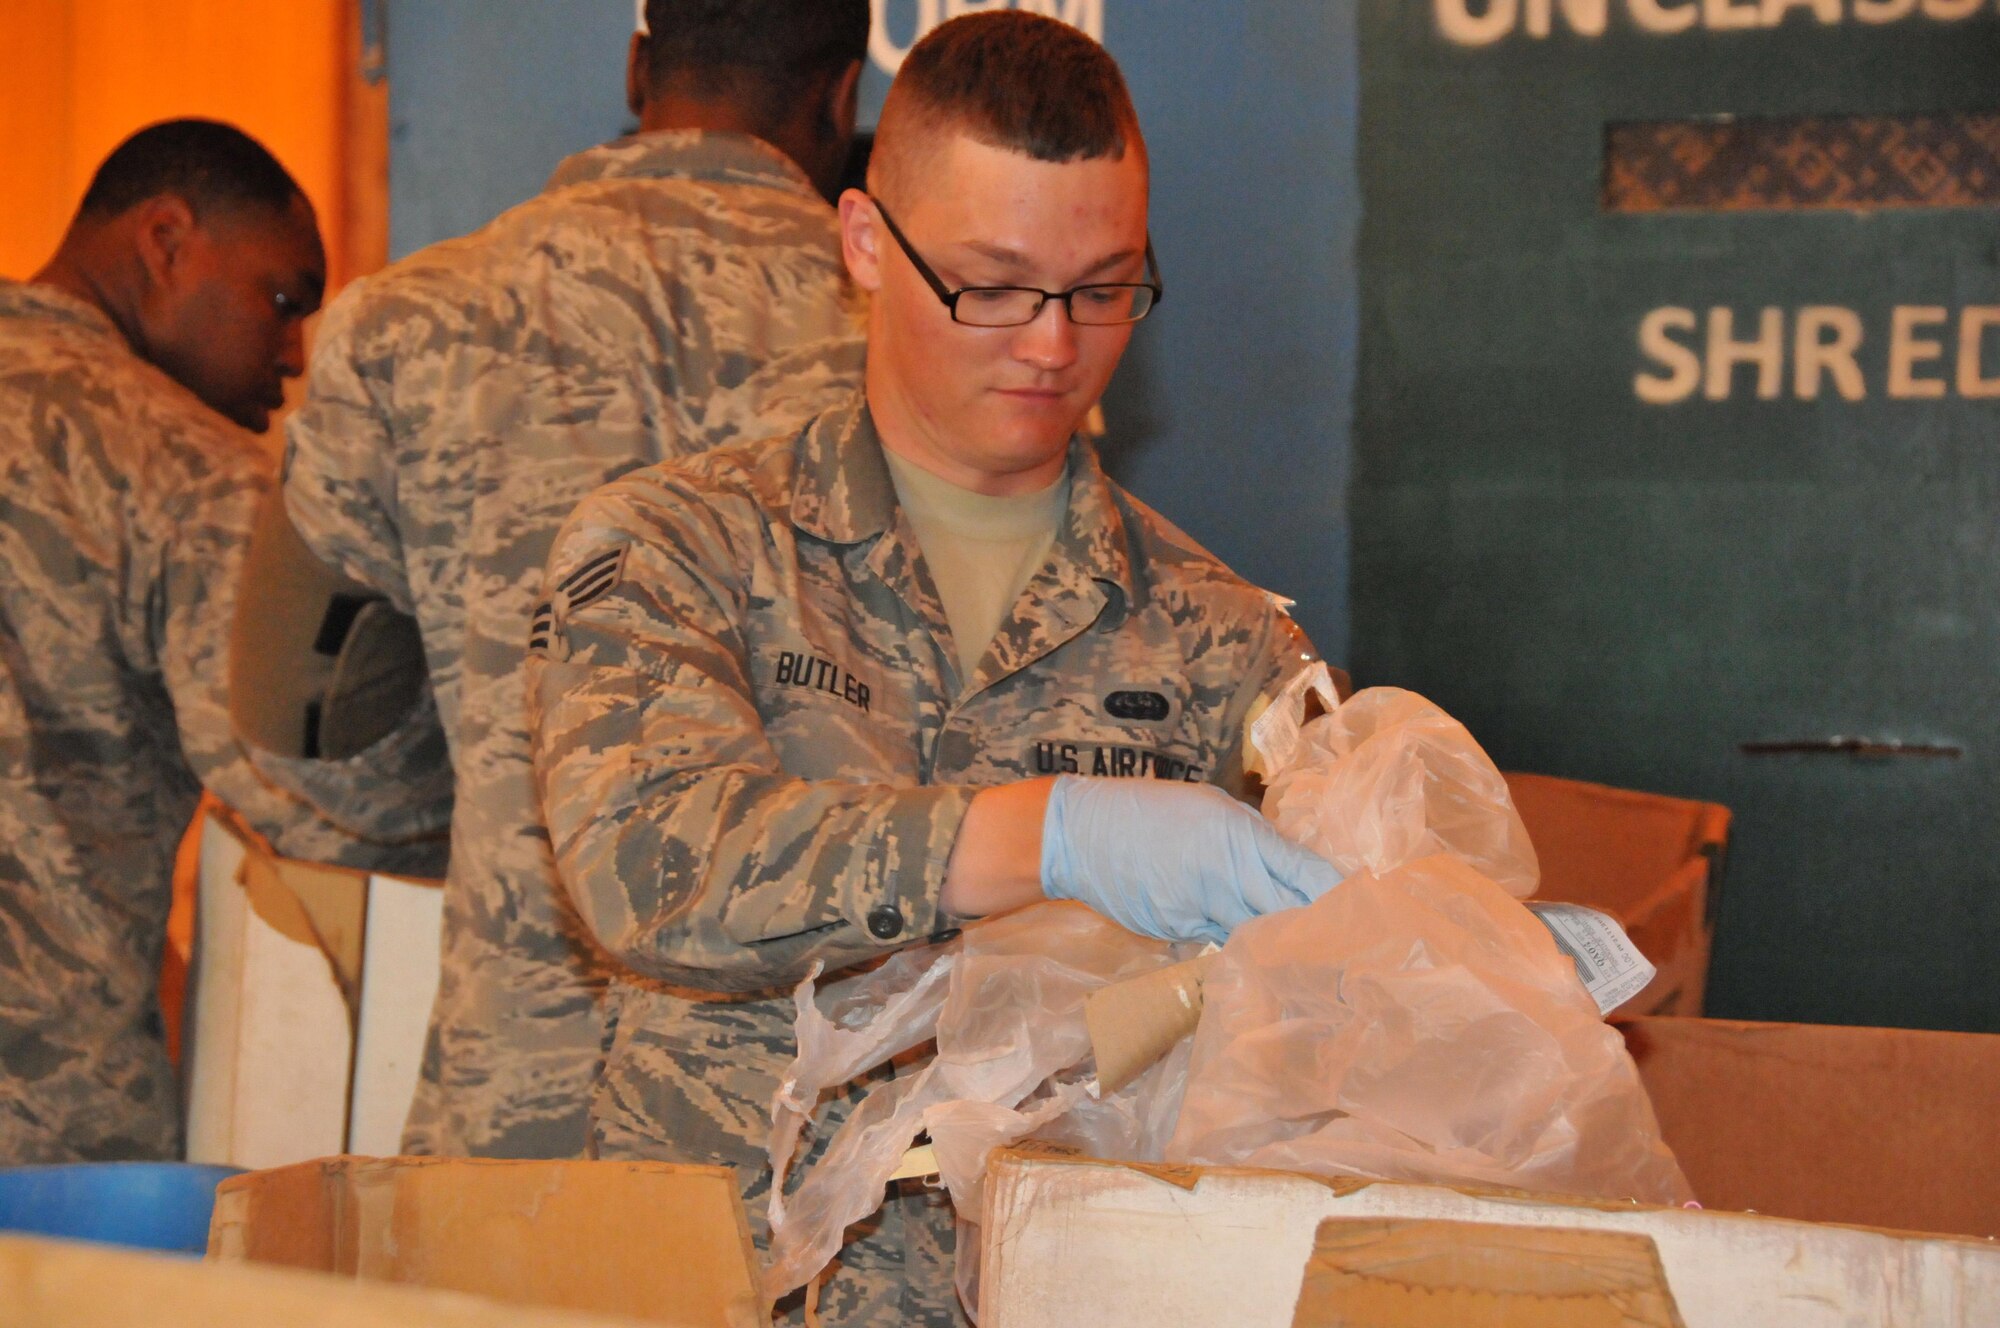 Senior Airman Devon Butler, 379th Expeditionary Civil Engineer Squadron force protection member, sort through bags of trash at the shred tent Mar. 15 at Al Udeid Air Base, Qatar. Bags of trash are sorted through for critical information, because personnel may have accidently thrown something away with it. (U.S. Air Force photo by Tech. Sgt. Terrica Y. Jones/Released)